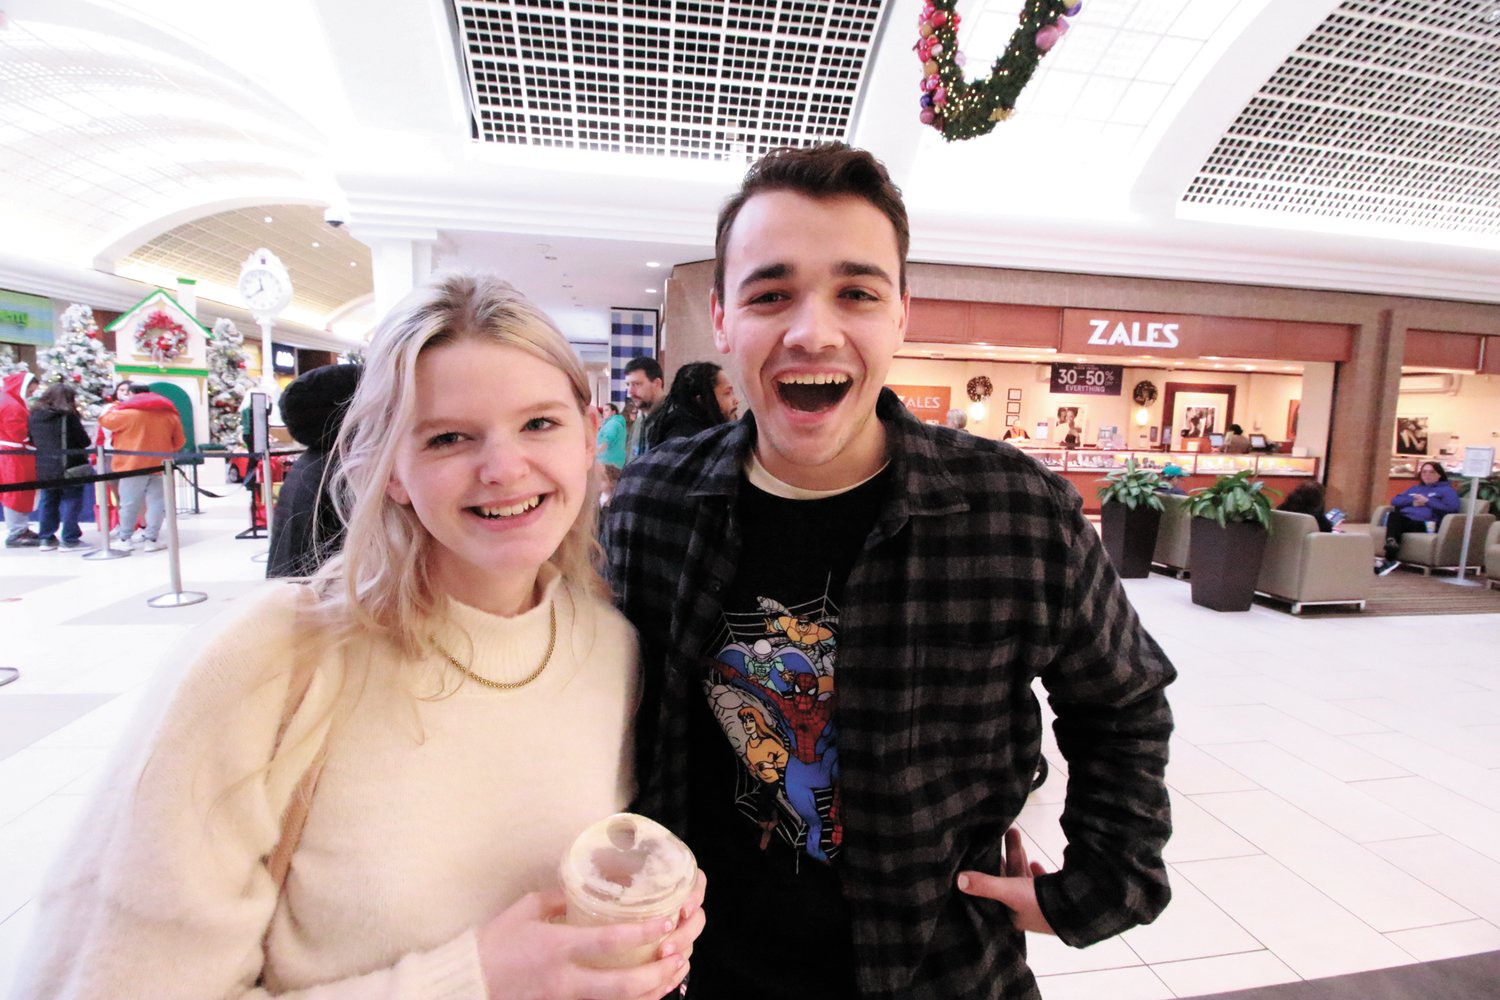 HUNTING FOR A RING: Warwick Mall was the first stop for Joe Rocco and Farah Kinsella as they looked for the perfect engagement ring on Black Friday. (Cranston Herald photos)